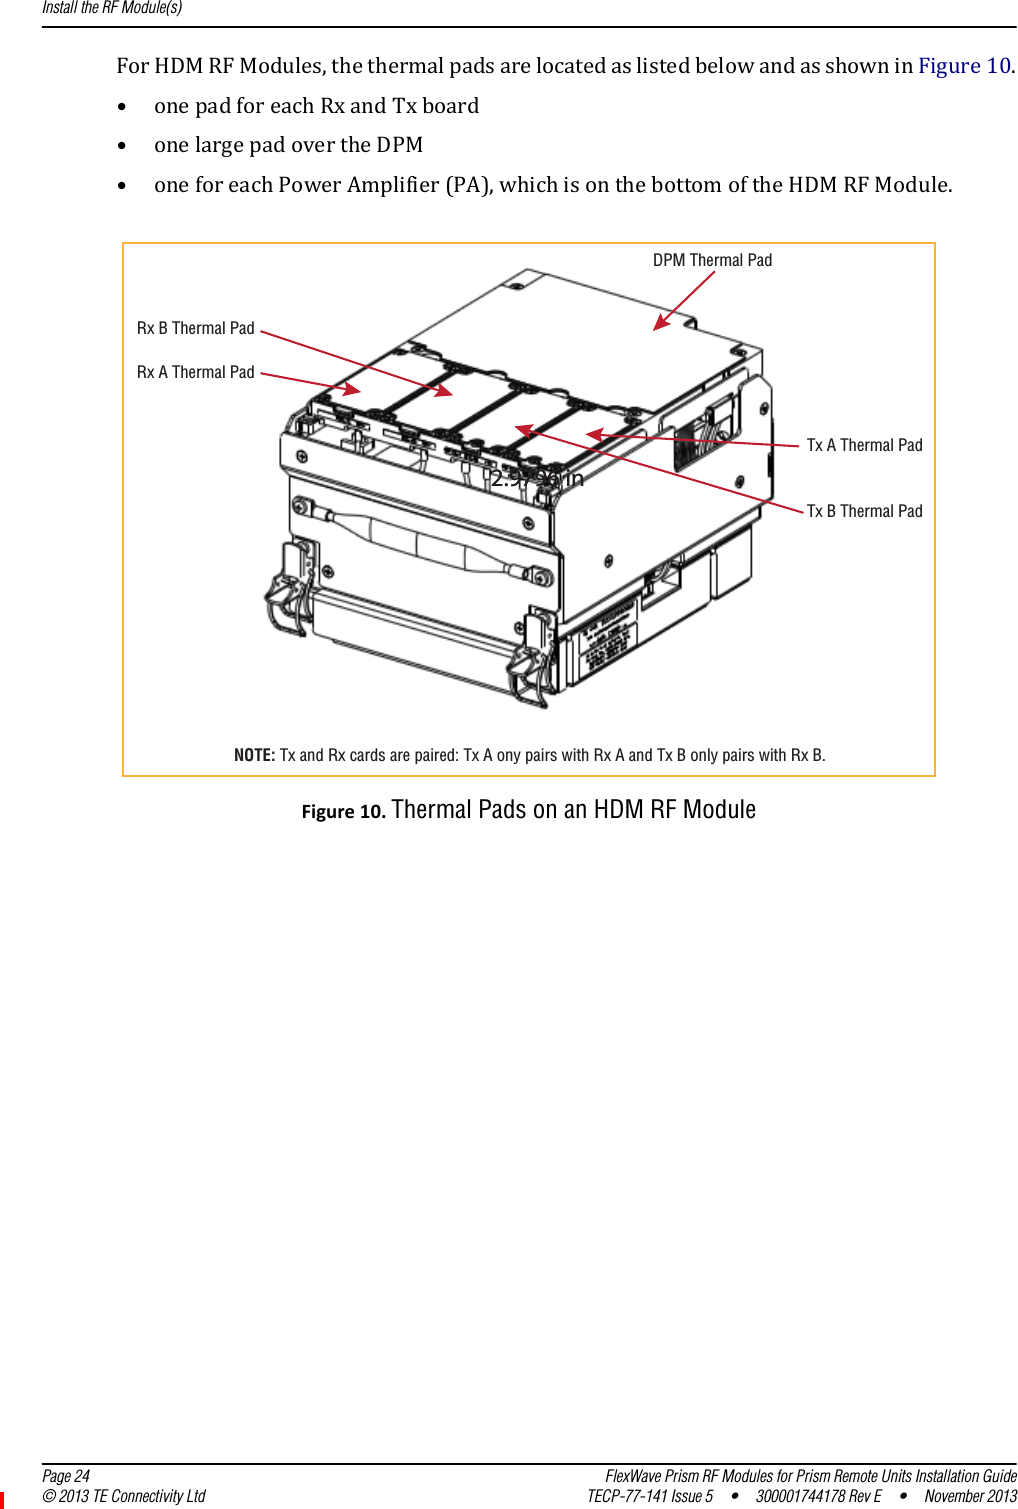 Install the RF Module(s)  Page 24 FlexWave Prism RF Modules for Prism Remote Units Installation Guide© 2013 TE Connectivity Ltd TECP-77-141 Issue 5  •  300001744178 Rev E  •  November 2013ForHDMRFModules,thethermalpadsarelocatedaslistedbelowandasshowninFigure10.•onepadforeachRxandTxboard•onelargepadovertheDPM•oneforeachPowerAmplifier(PA),whichisonthebottomoftheHDMRFModule.Figure10.Thermal Pads on an HDM RF ModuleDPM Thermal PadTx A Thermal PadTx B Thermal PadRx A Thermal PadRx B Thermal Pad2.9796 in2.9796 inNOTE: Tx and Rx cards are paired: Tx A ony pairs with Rx A and Tx B only pairs with Rx B.